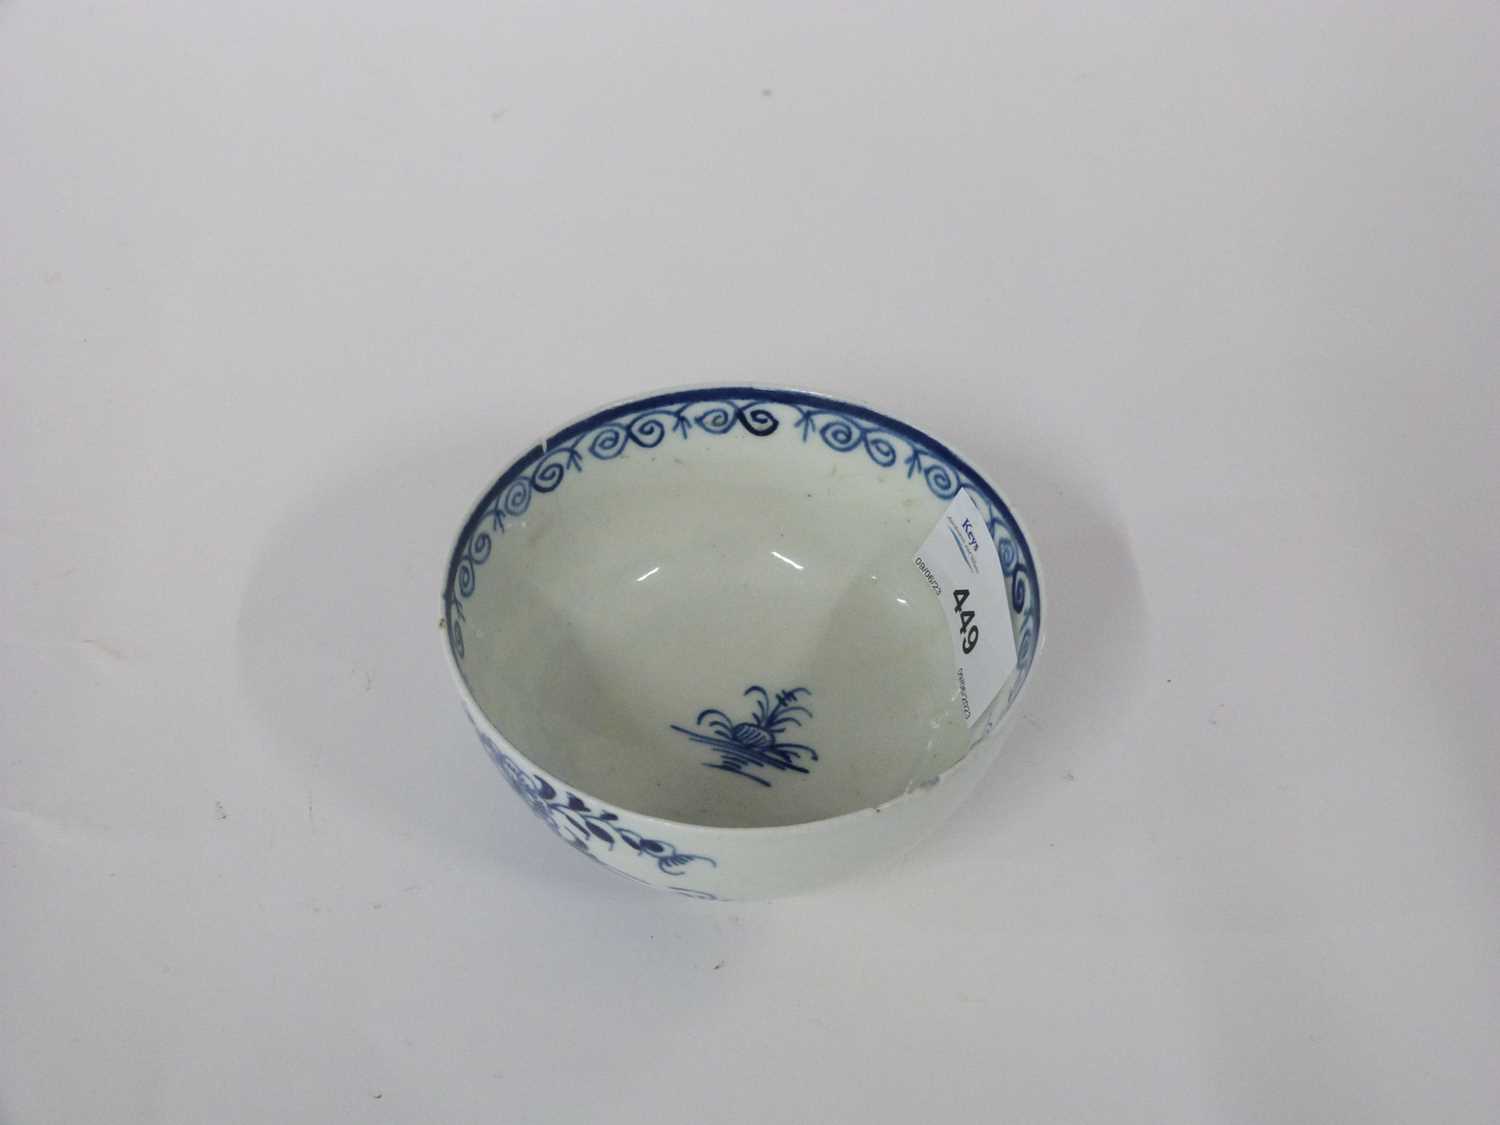 Lowestoft porcelain slop bowl with flowers and bamboo fence pattern - Image 2 of 2